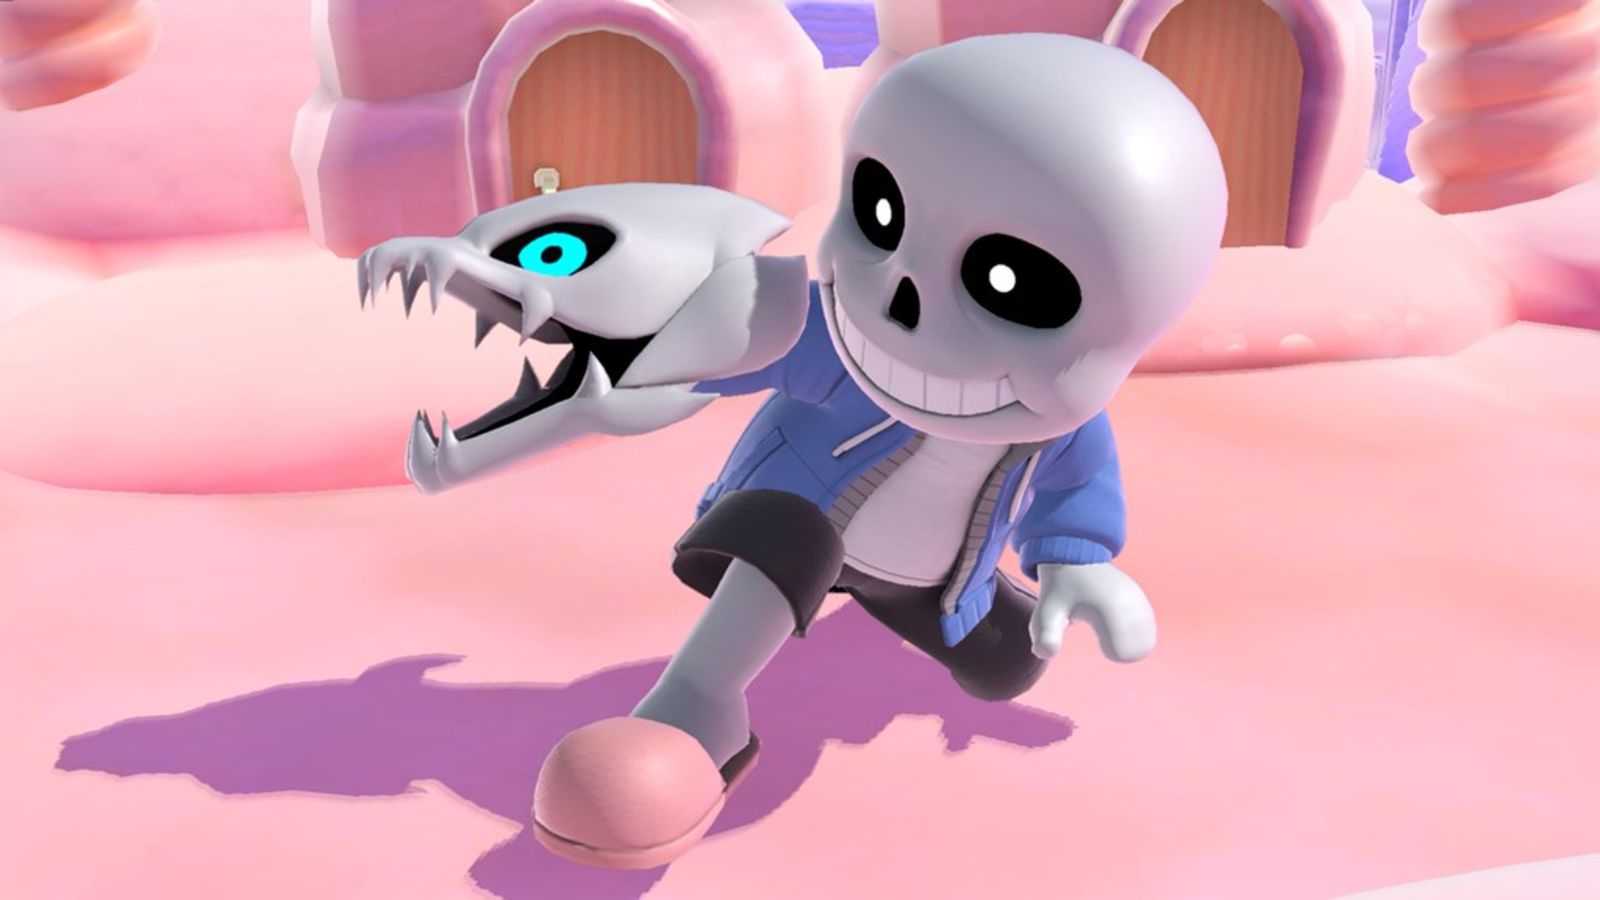 Undertale&;s Sans Joins Smash Bros. As A Mii Fighter Costume